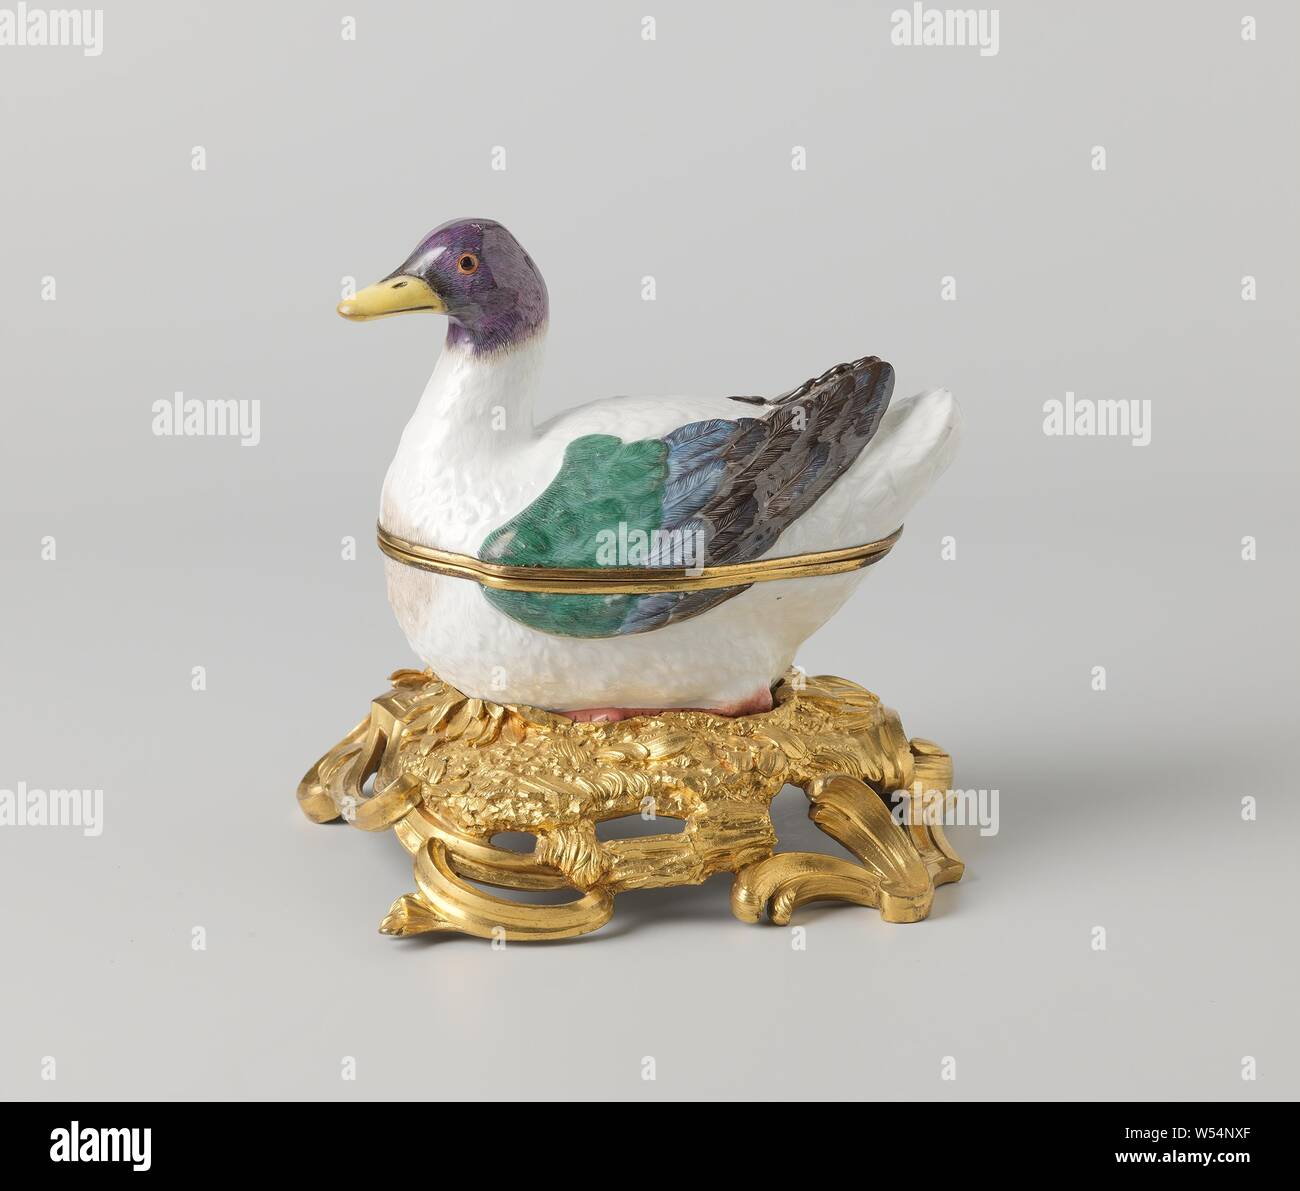 Box with lid in the shape of a duck on a pedestal, Box of painted porcelain. The box has the shape of a duck. The duck sits on a gilt bronze rococo pedestal. The duck is partly painted in blue, green, brown-gray and black, the head in blue, purple and gray with a yellow beak. The box is unnoticed., Meissener Porzellan Manufaktur, Meissen, c. 1740 - c. 1748 and/or c. 1750, porcelain (material), bronze (metal), gilding, h 5.5 cm w 16.7 cm × d 19 cm h 5.2 cm w 9.5 cm × d 14.5 cm h 9 cm w 9 cm × d 17.5 cm h 18.5 cm Stock Photo